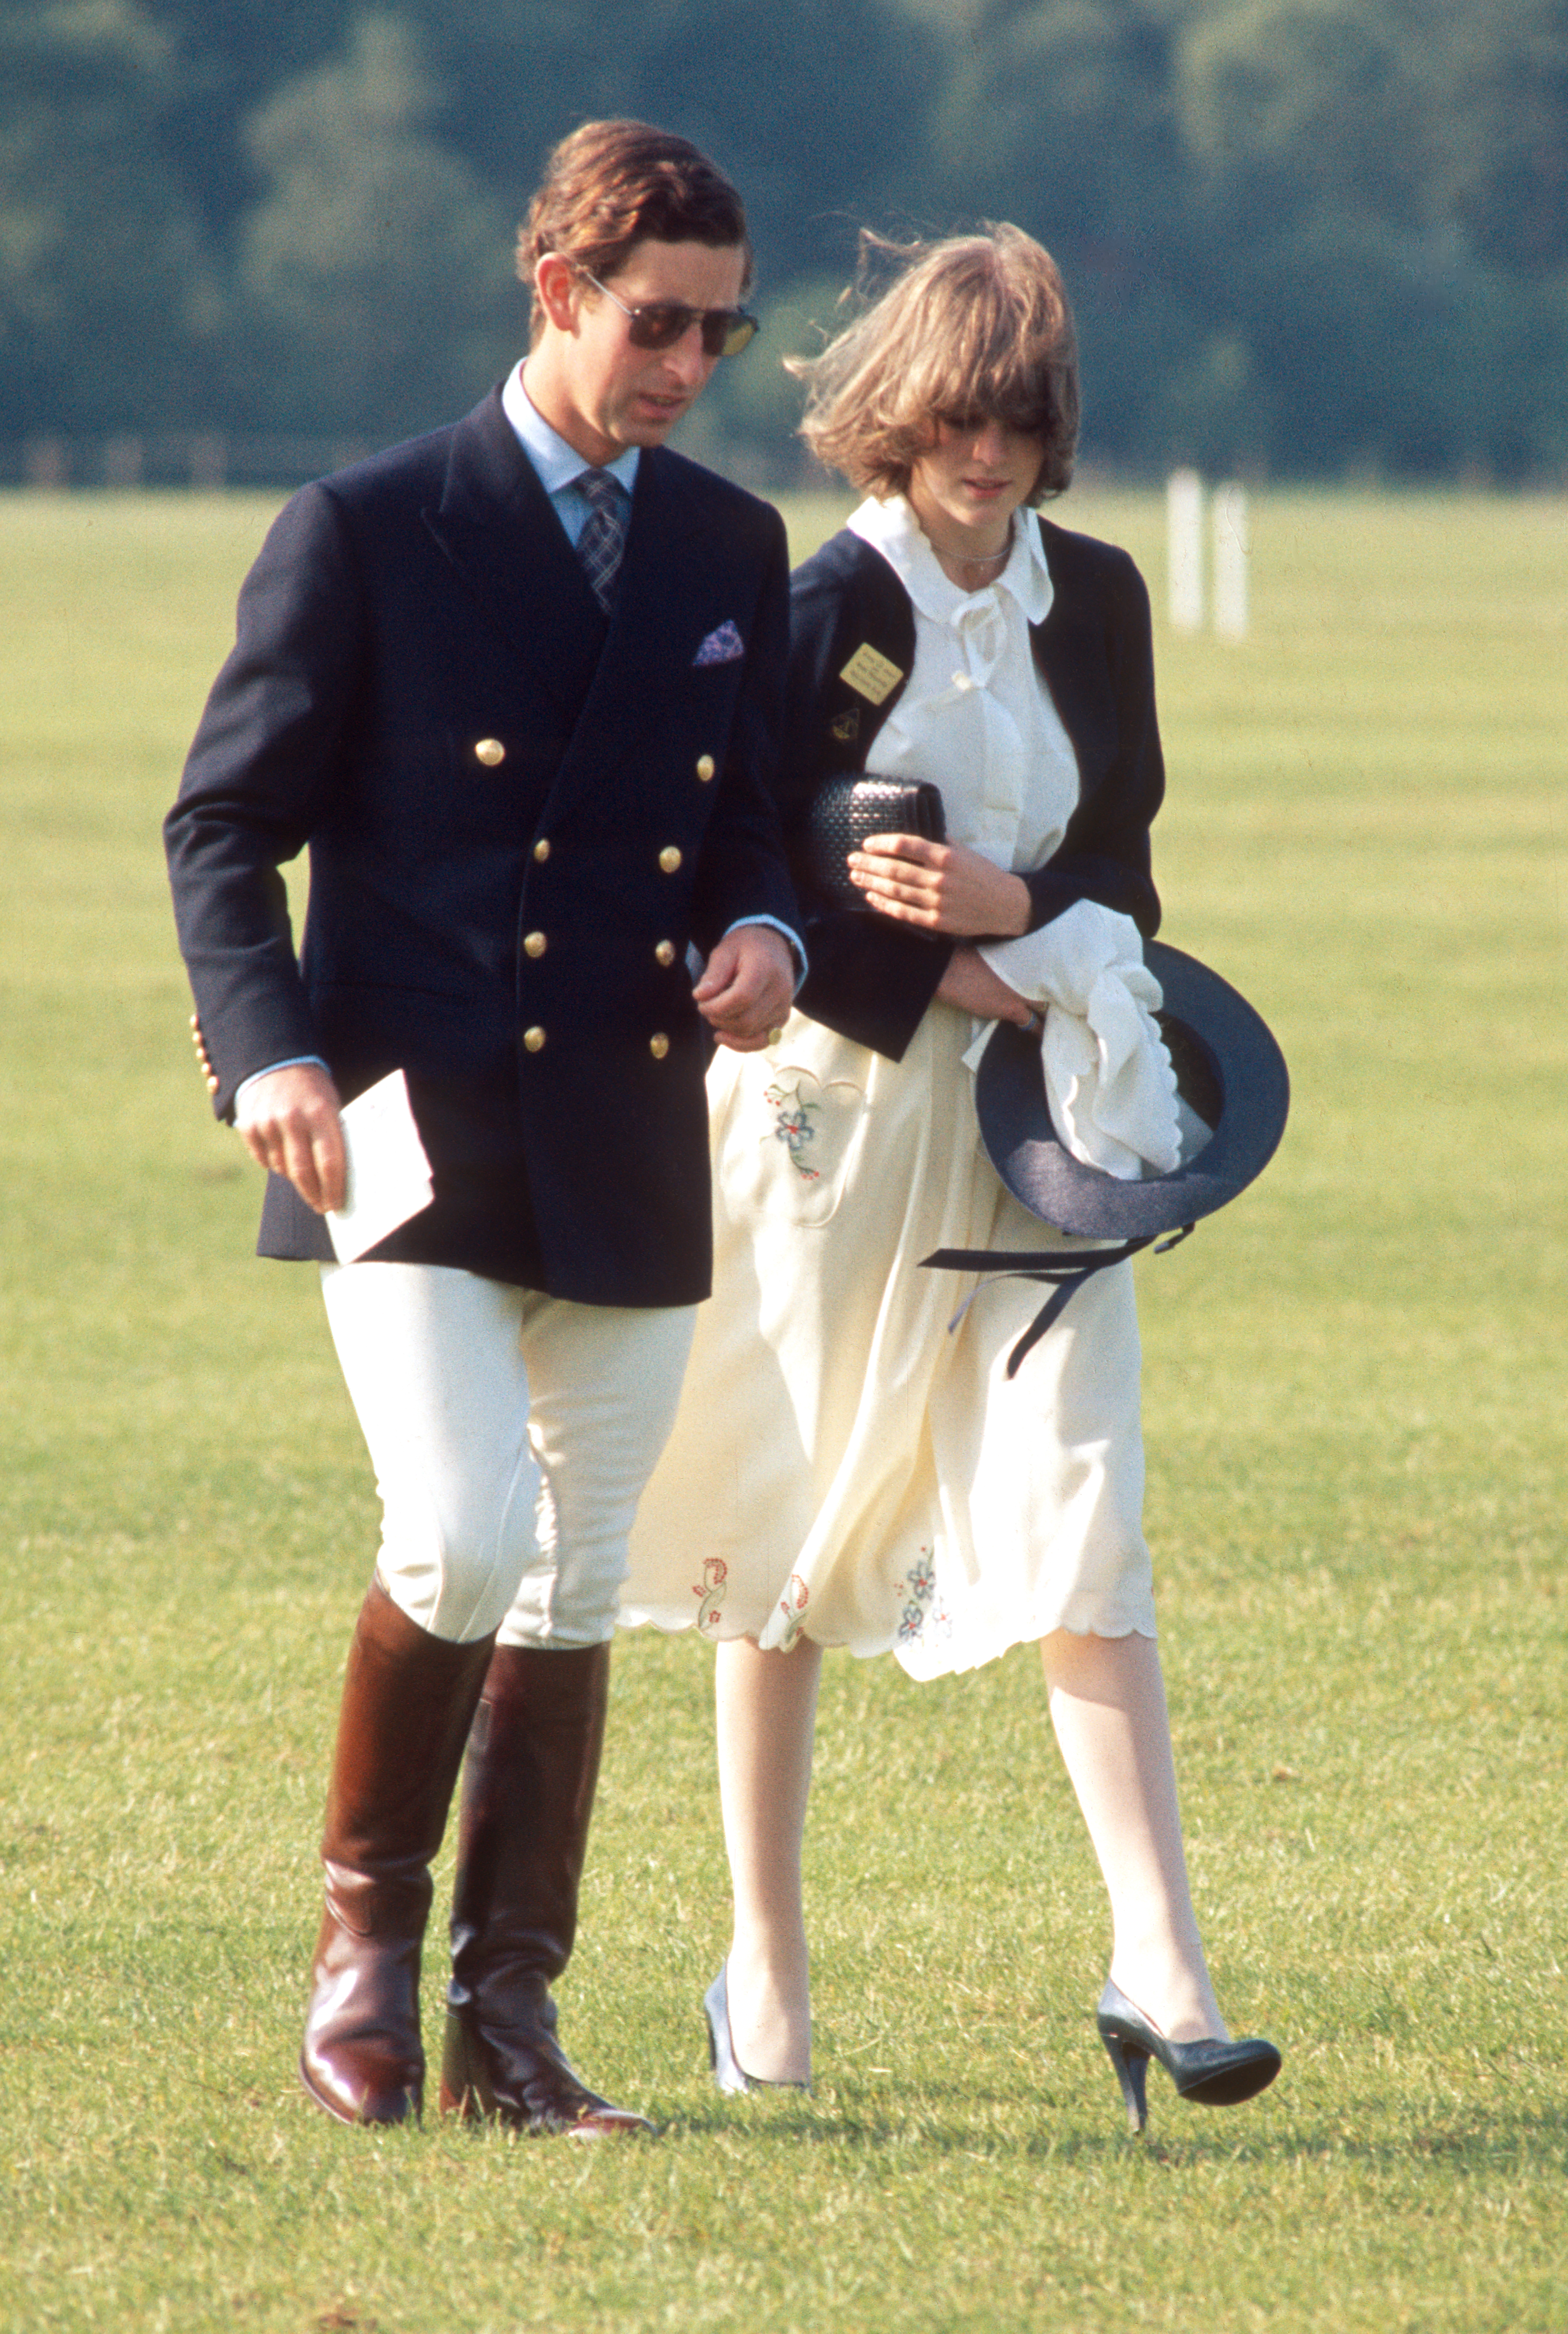 Prince Charles and Jane Wellesley, circa 1974, in Windsor, United Kingdom. | Source: Getty Images